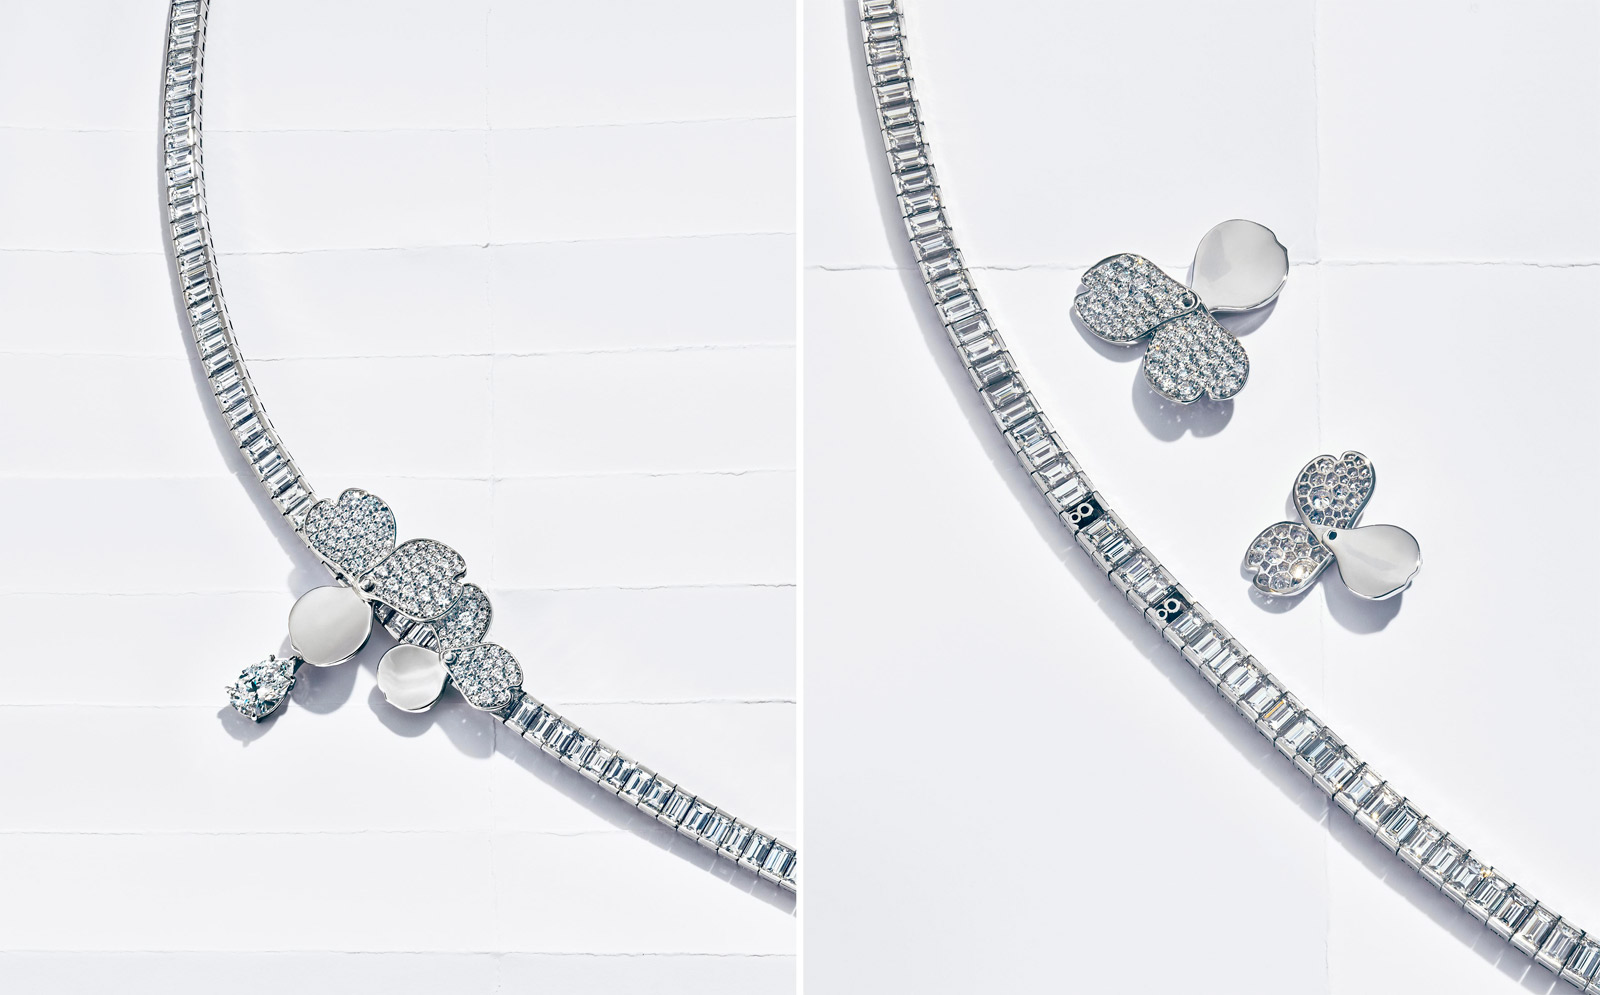 Tiffany & Co. 'Paper Flowers' collection choker with detachable flower motifs in diamonds and platinum